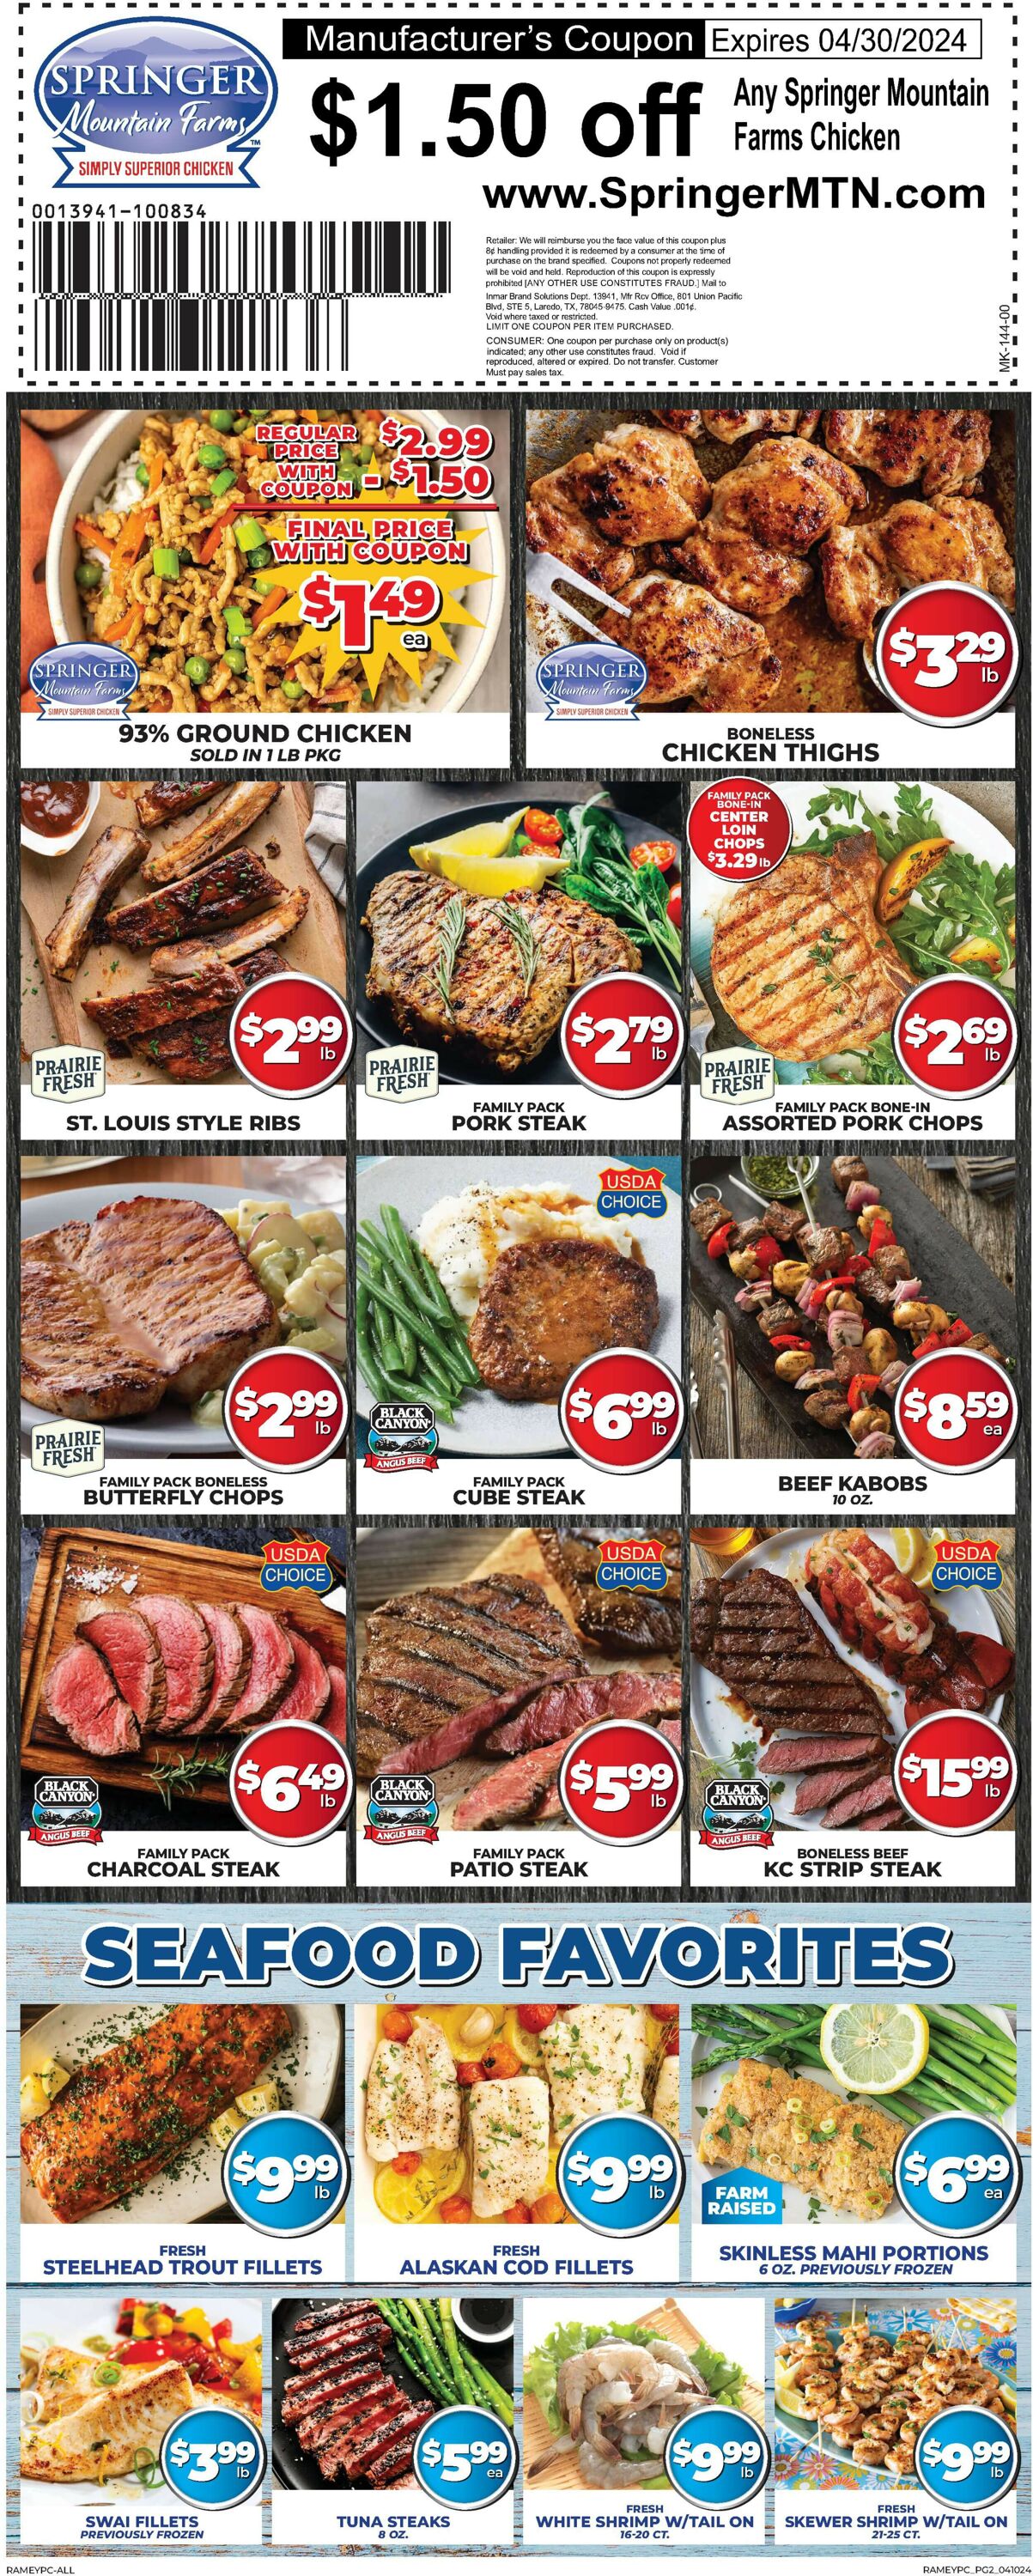 Price Cutter Weekly Ad Circular - valid 04/10-04/16/2024 (Page 2)